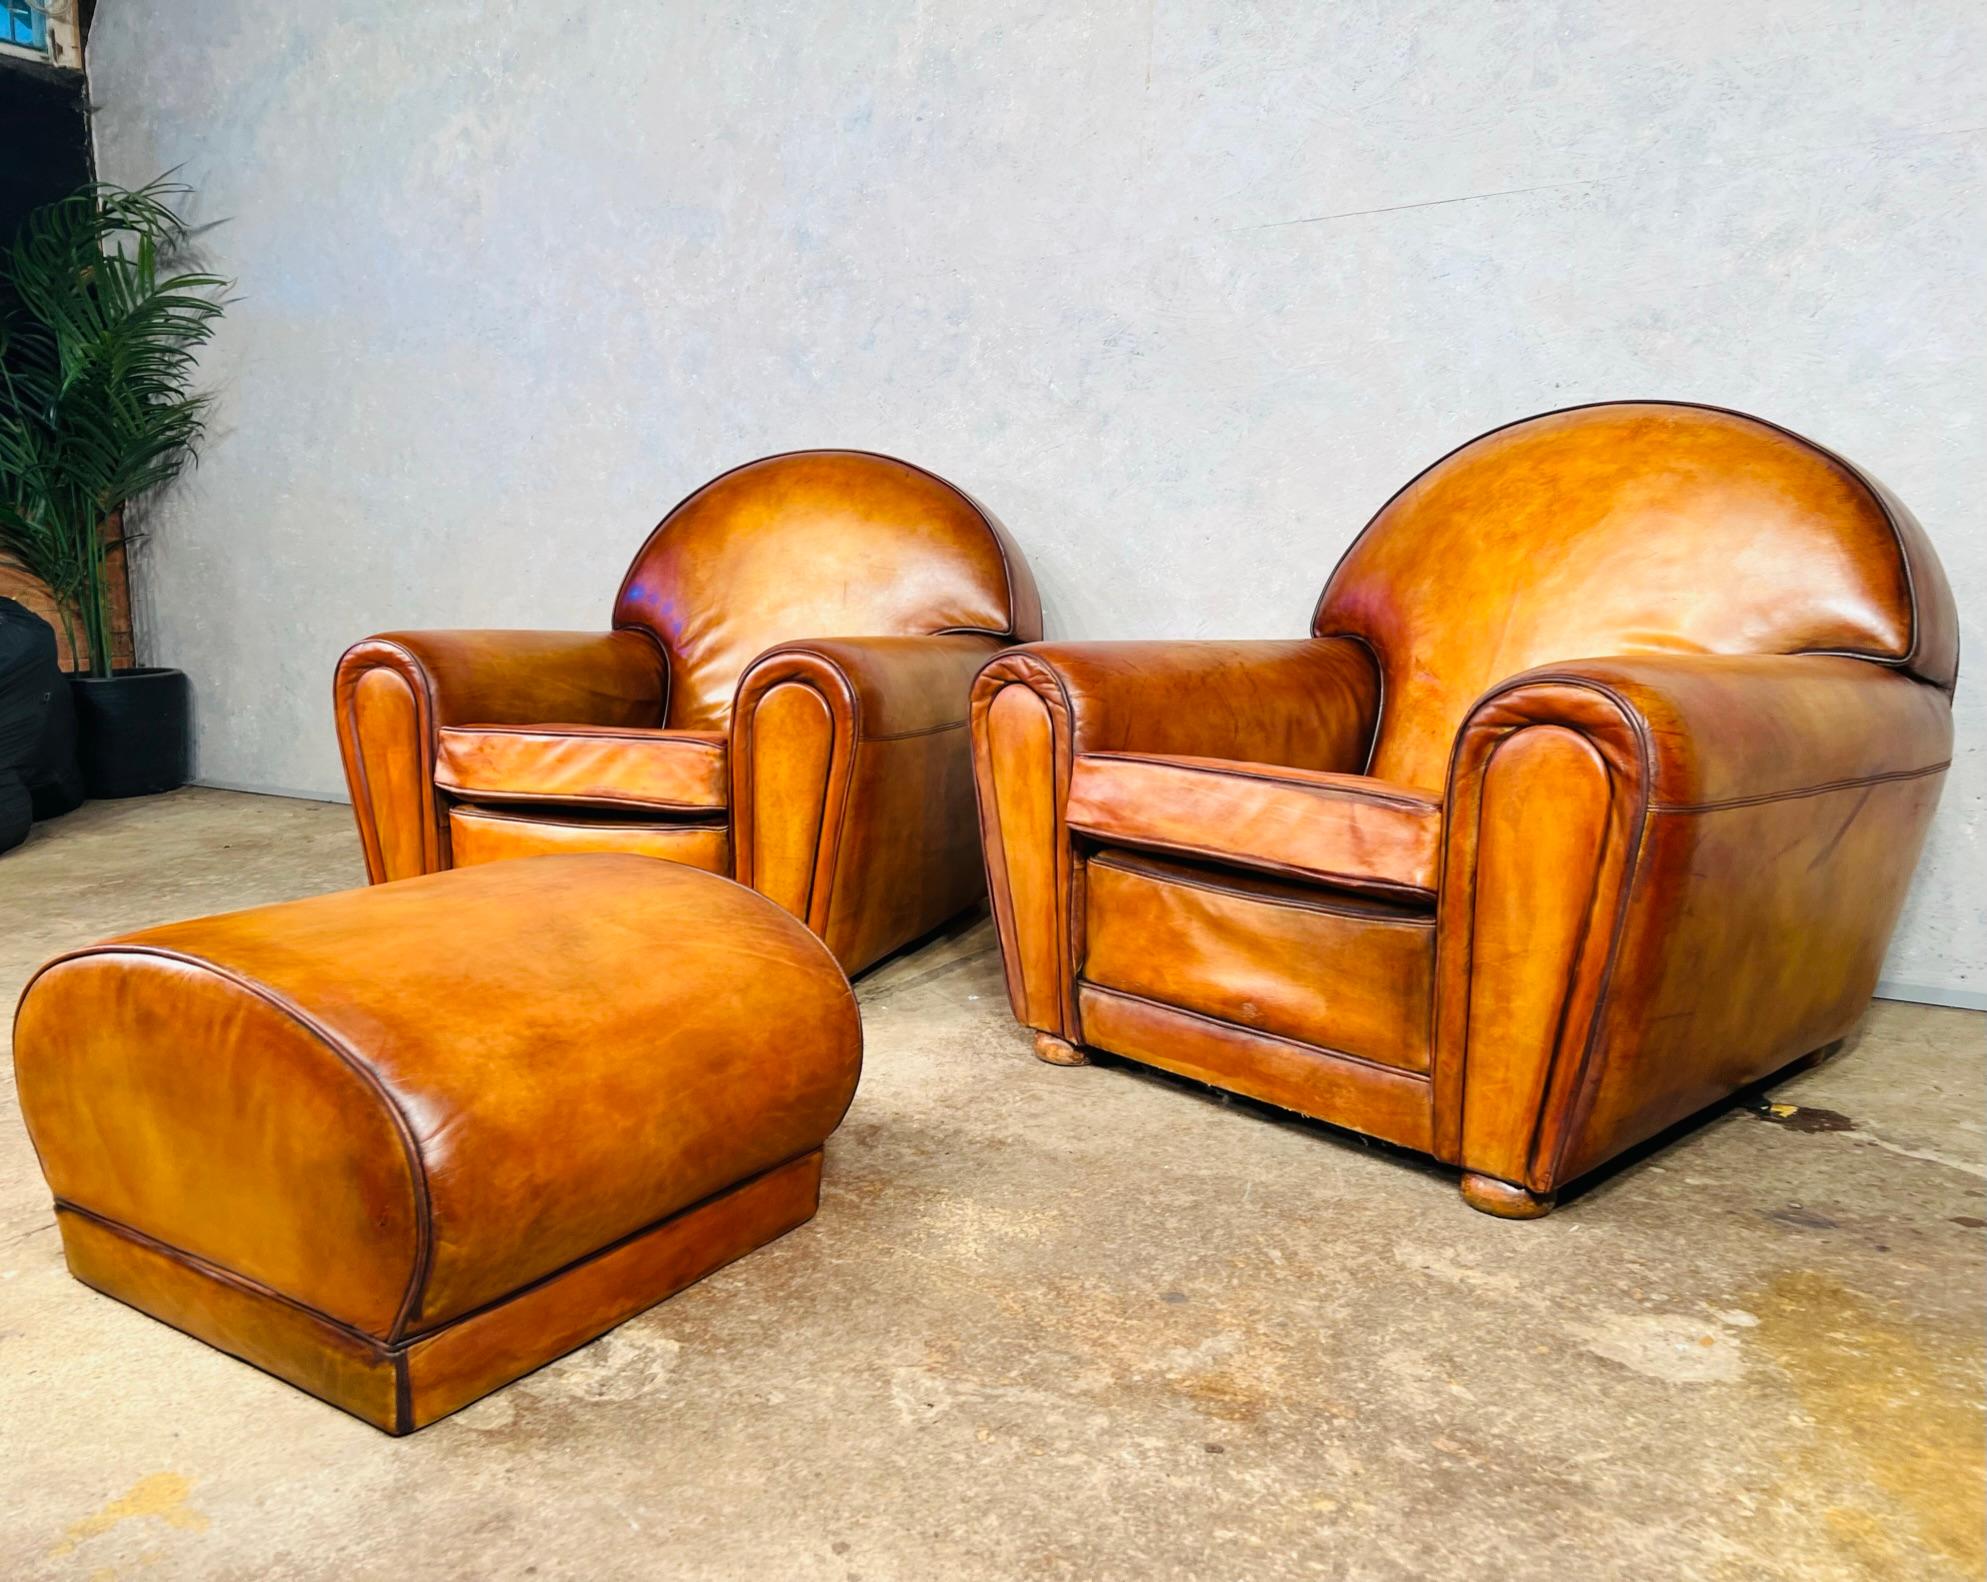 Huge Pair of Art Deco Leather Club Chairs Armchairs and Foot Stool 1940s #668 In Good Condition In Lewes, GB